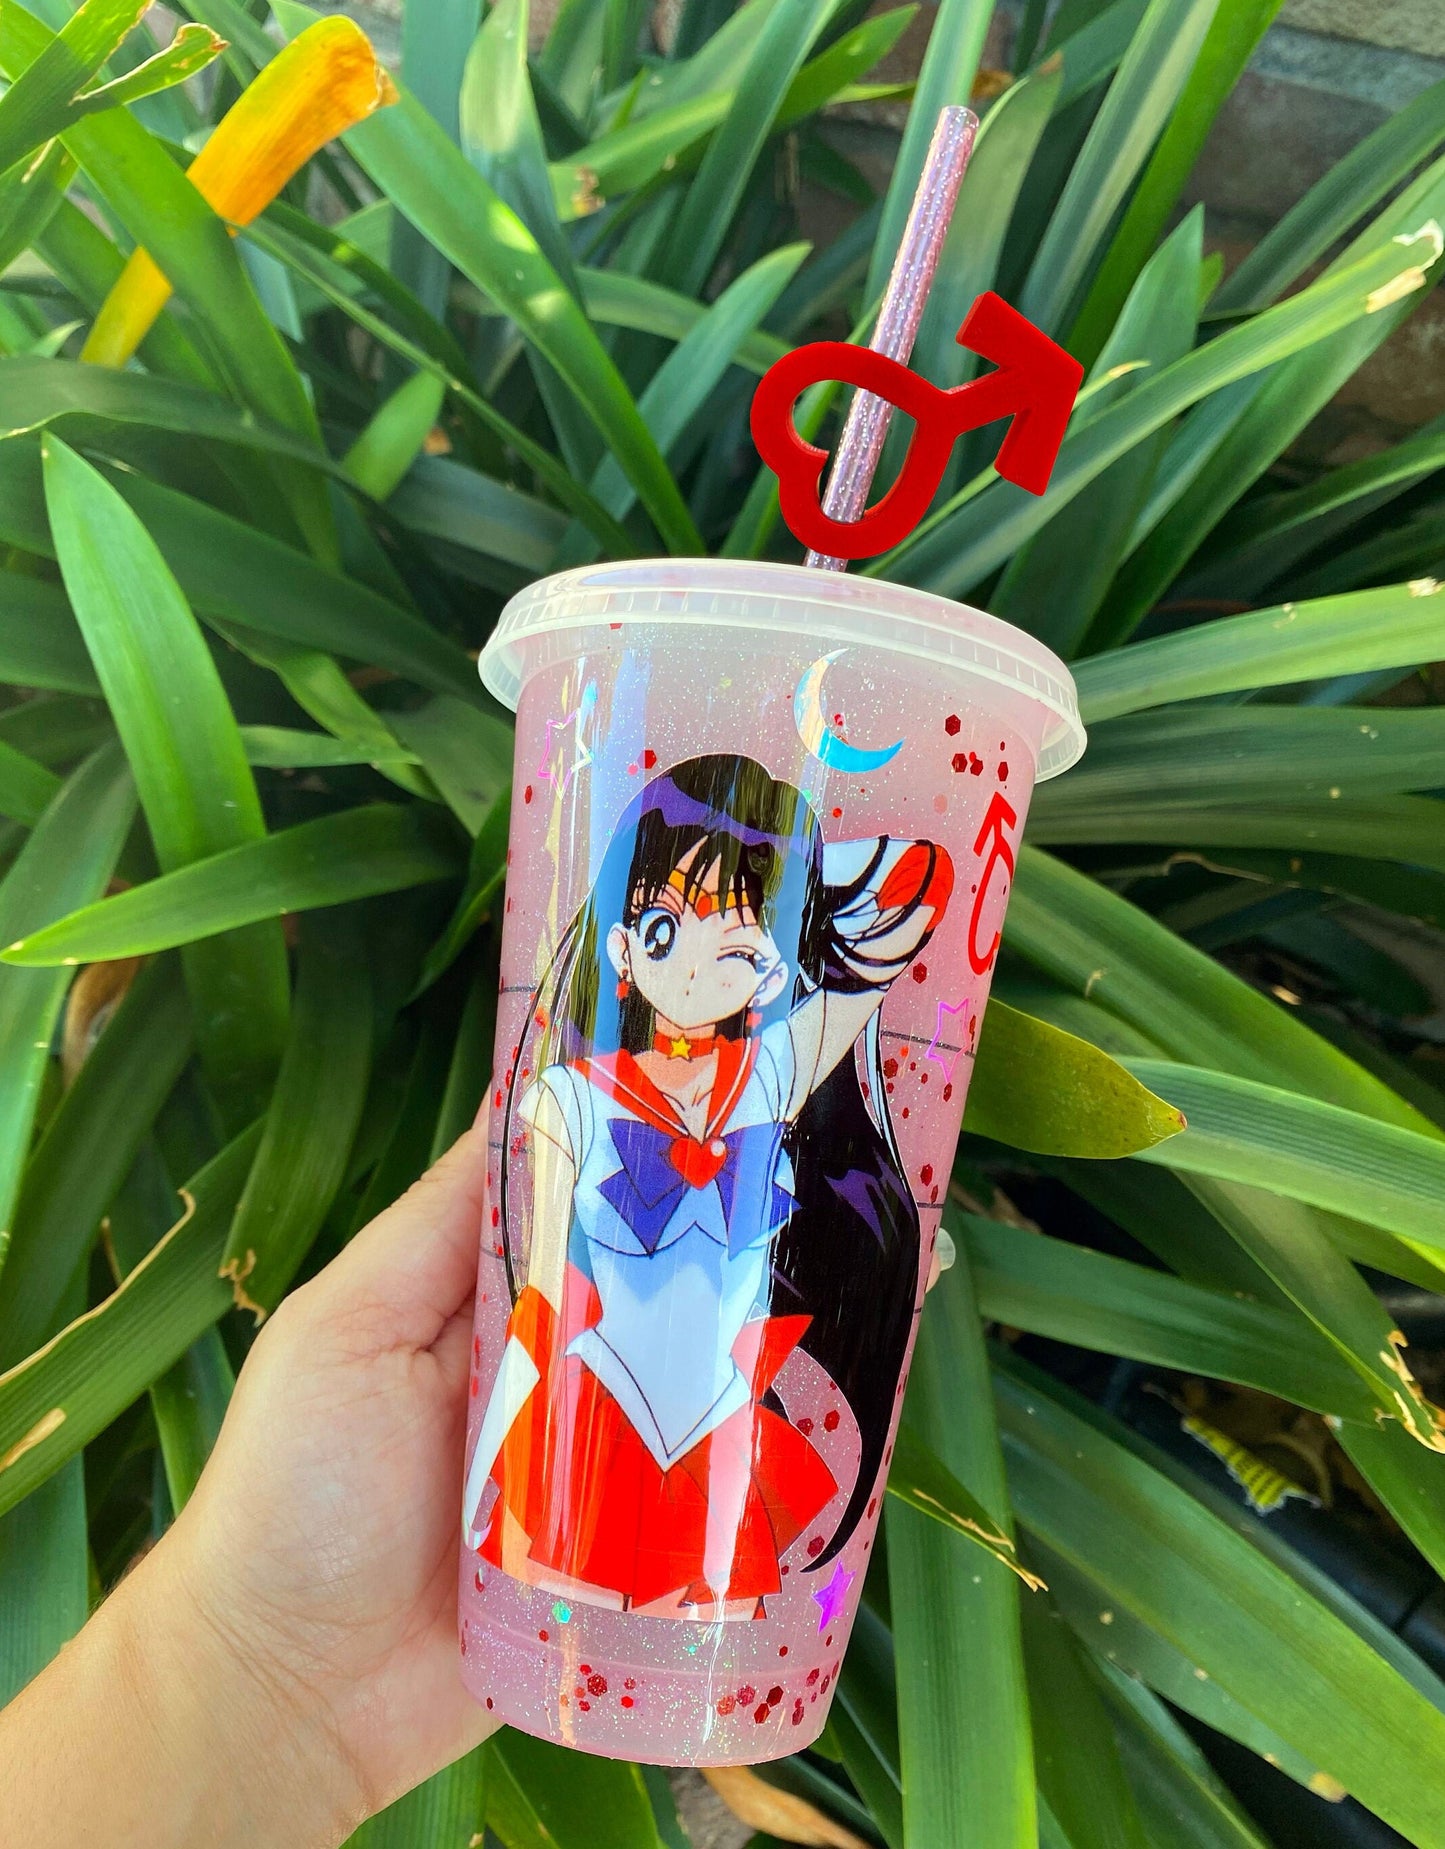 Anime Scout Sailor Starbucks Cup